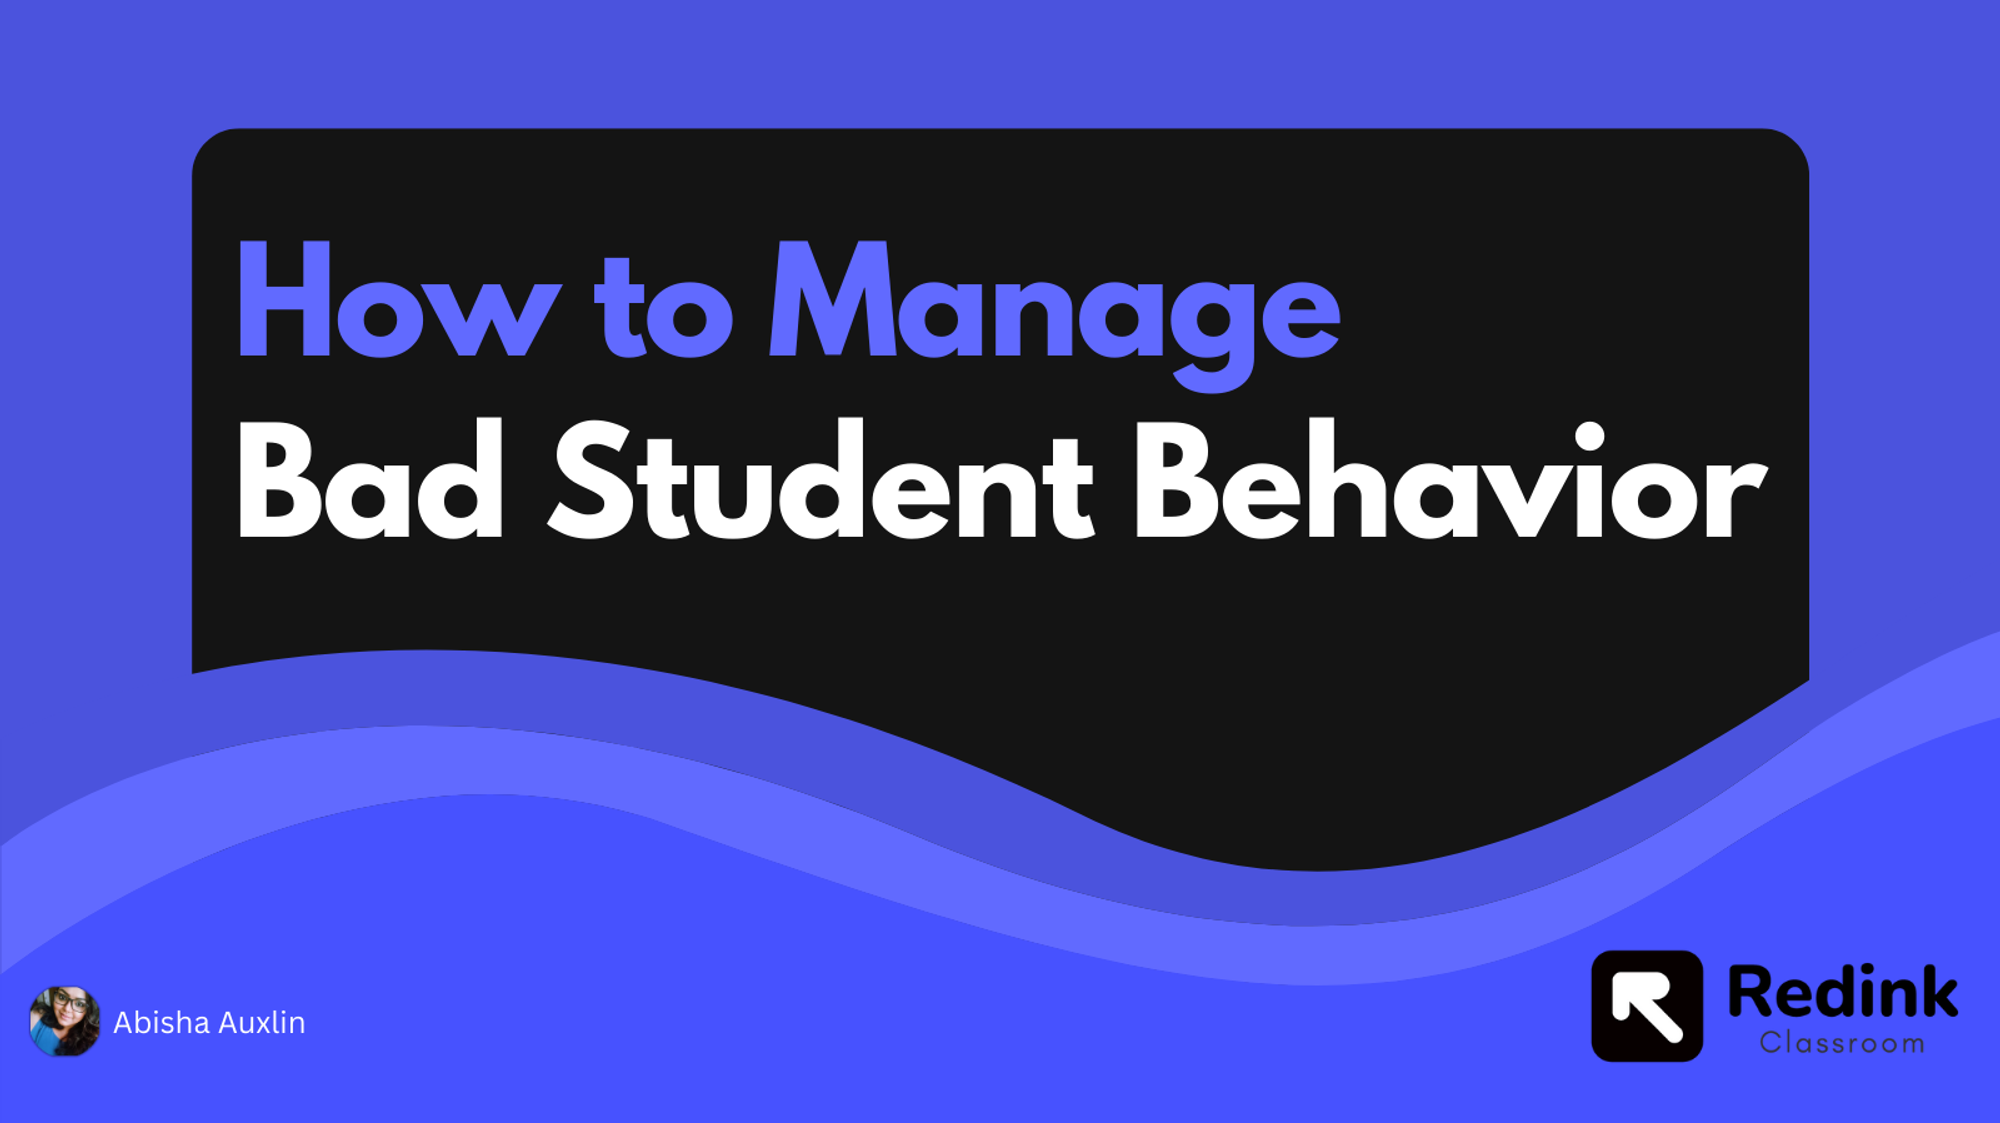 Bad Student Behavior - How to manage them effectively